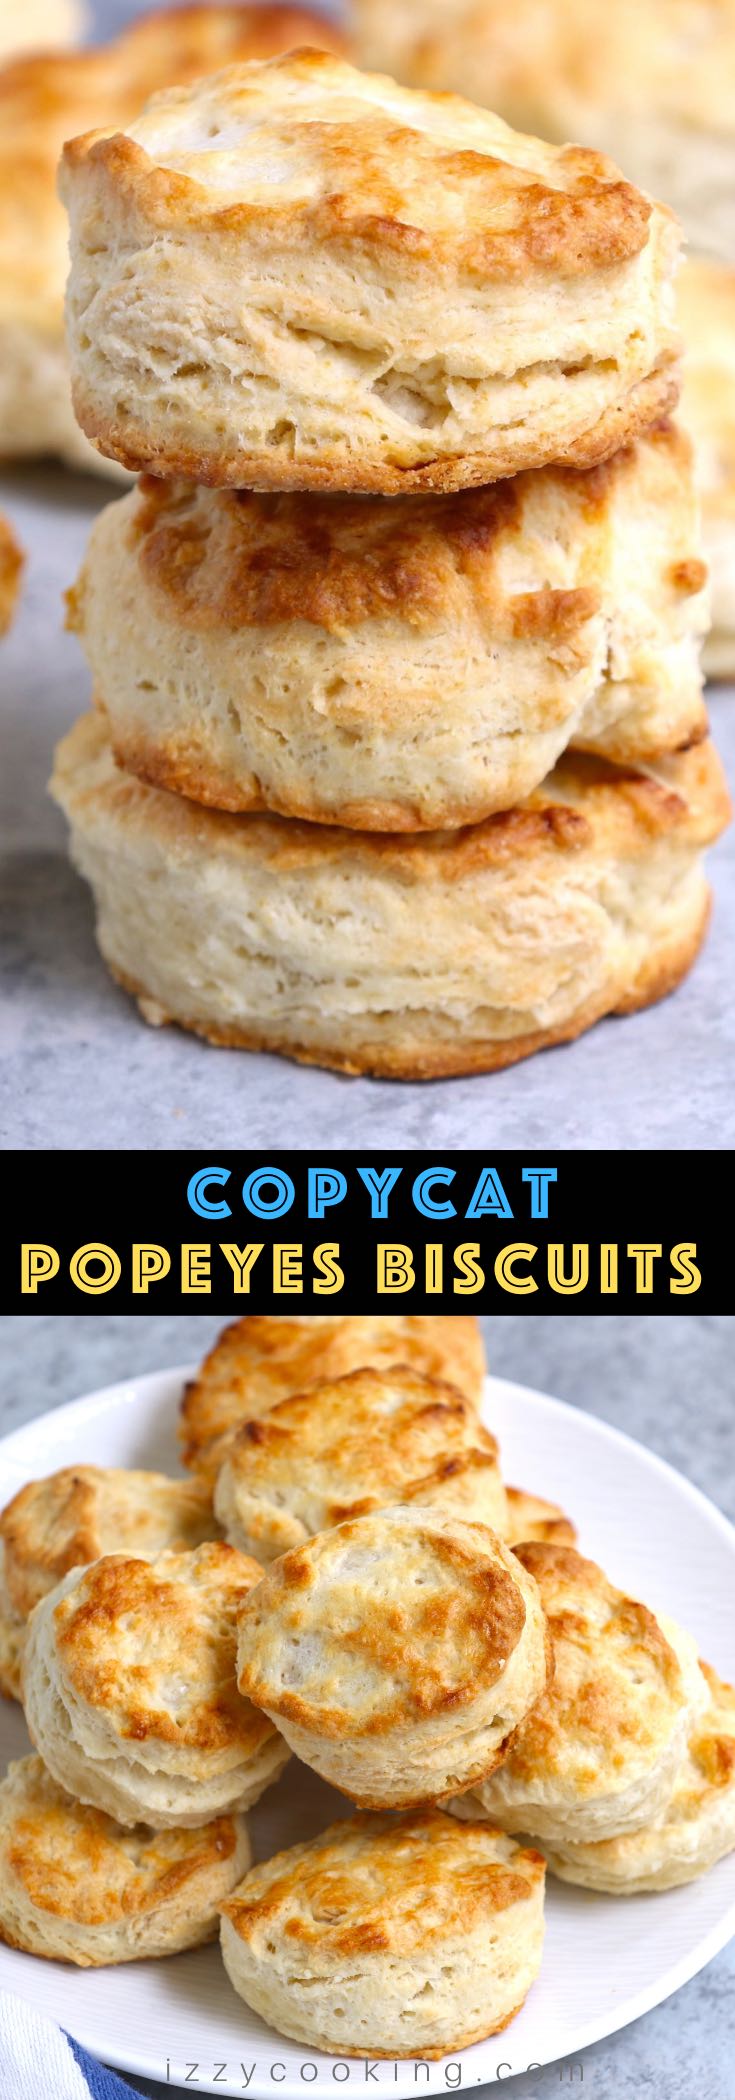 These copycat Popeyes Buttermilk Biscuits are flaky, buttery, crispy and oh-so-satisfying! They’re a homemade take on a fast-food favorite. Though Popeyes is best known for their delicious fried chicken, biscuits are one of their most popular side dishes - and for good reason. 